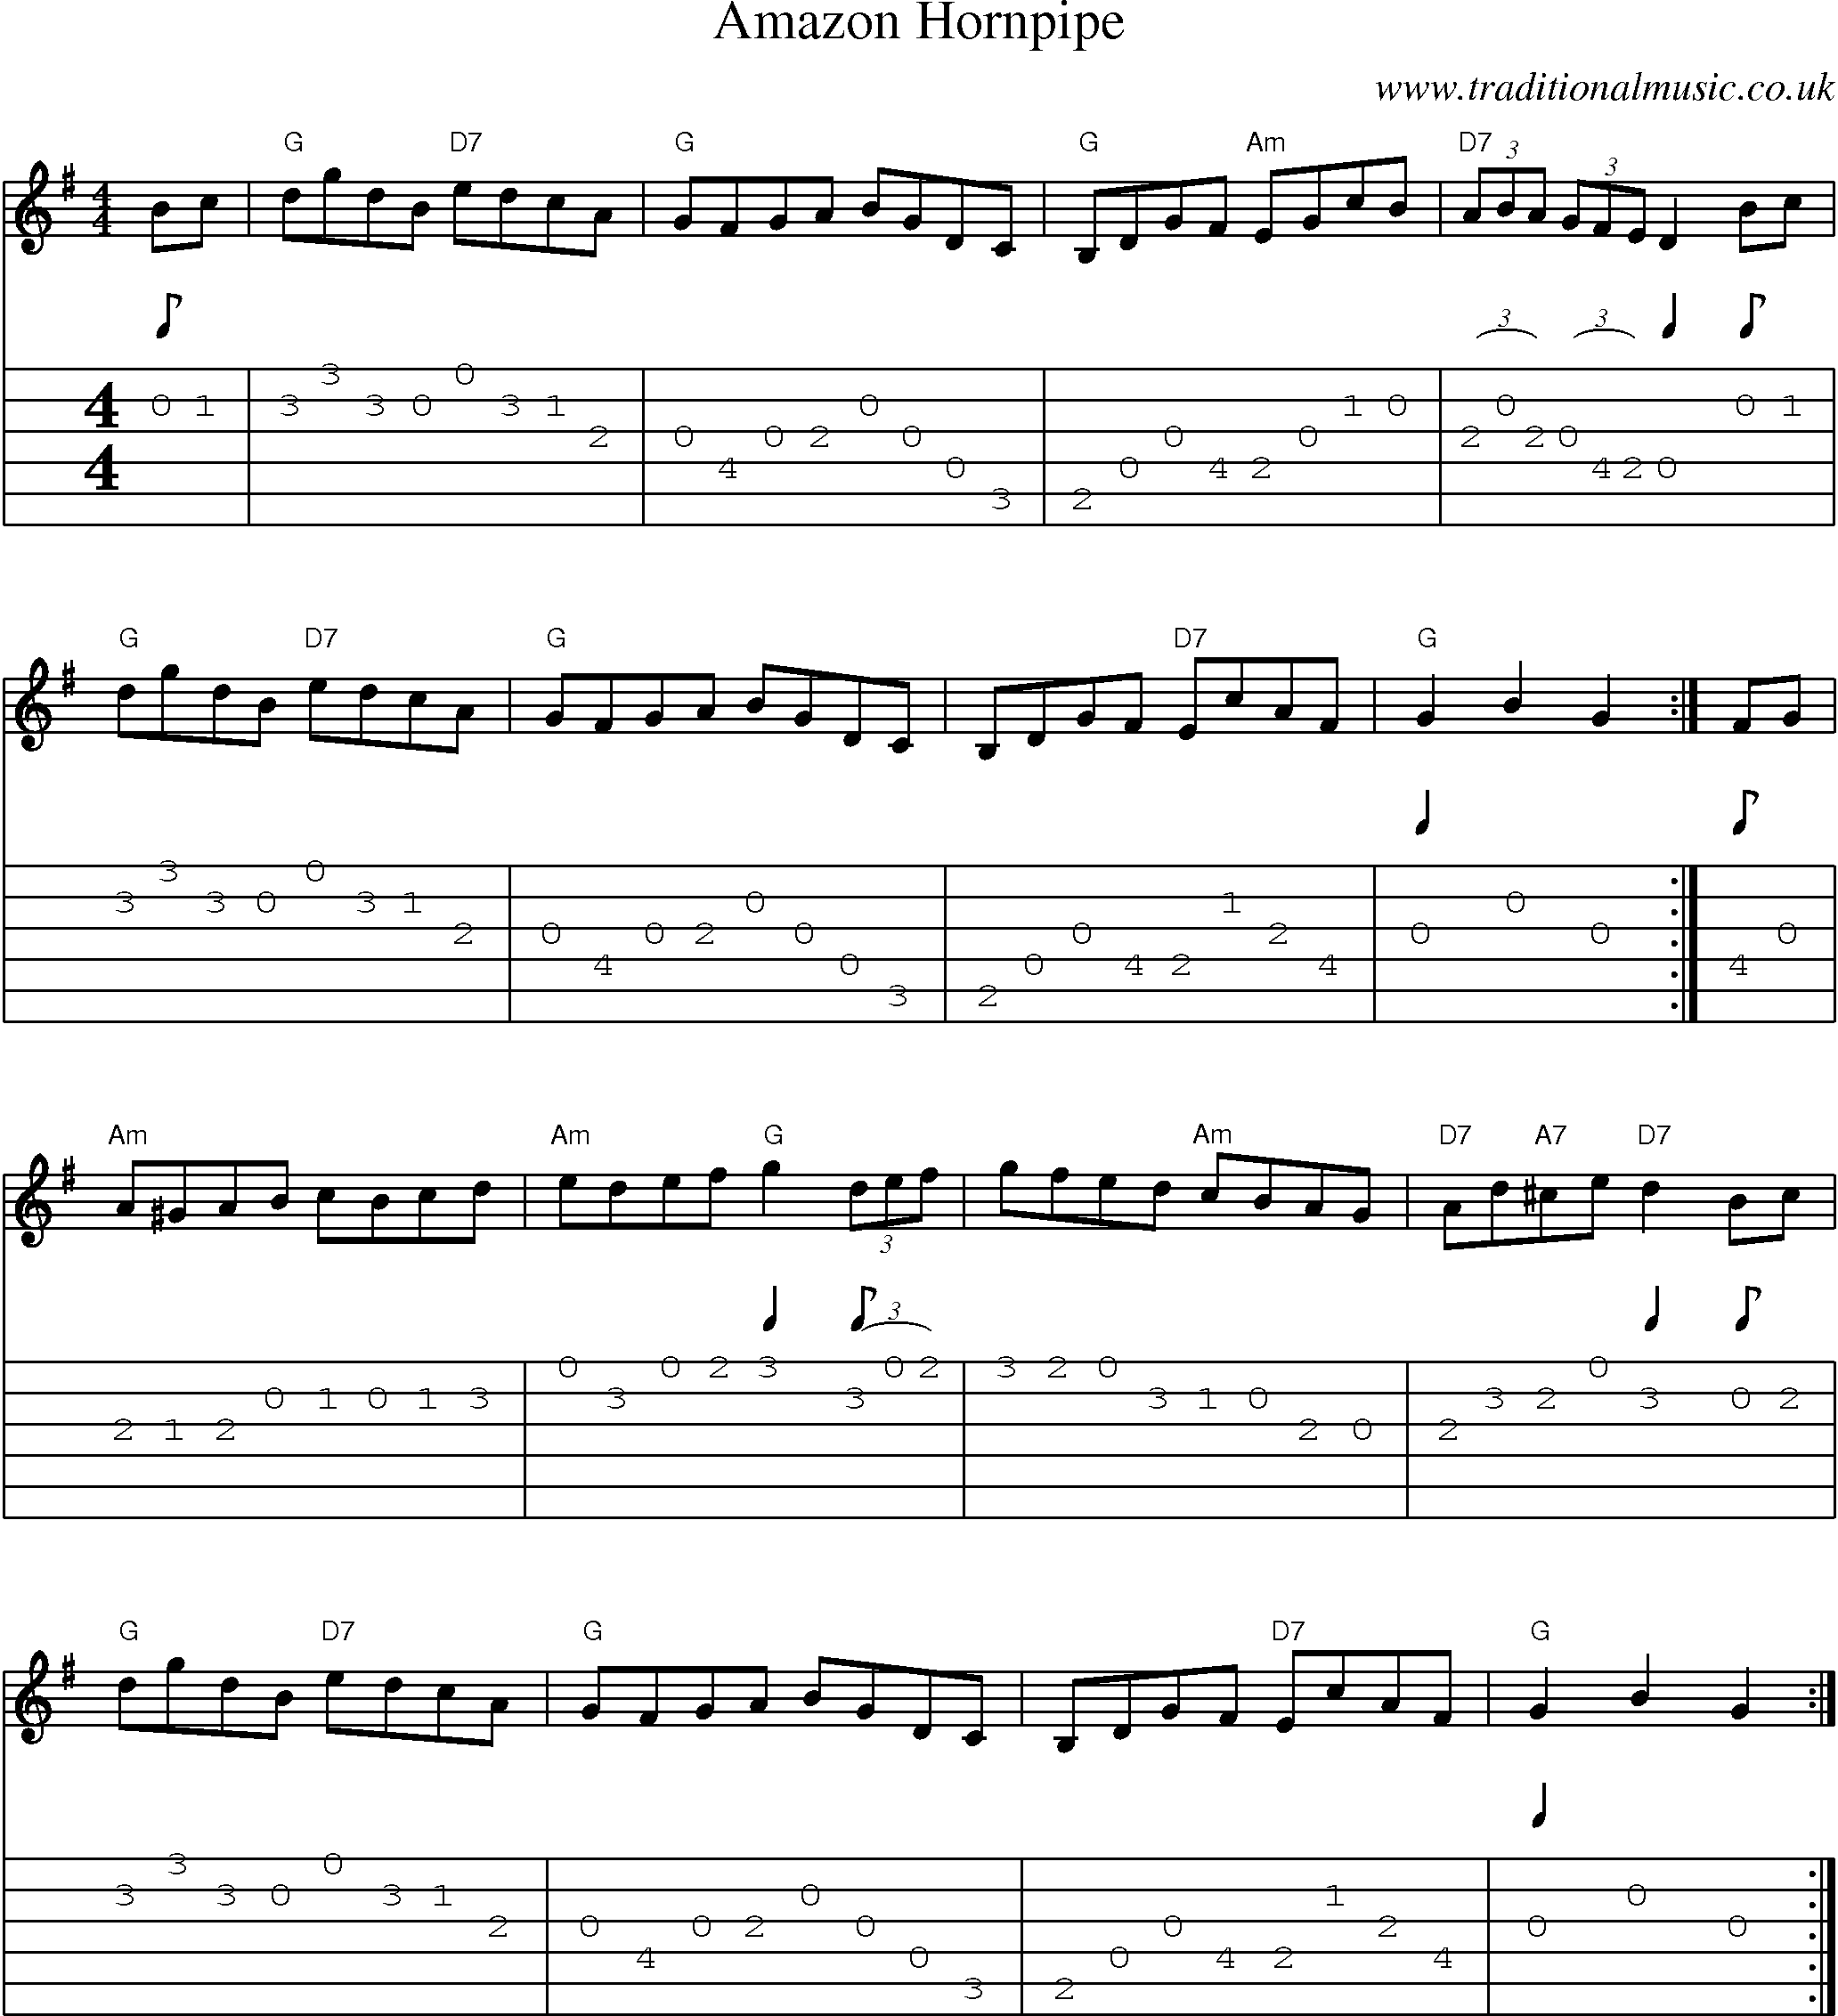 Music Score and Guitar Tabs for Amazon Hornpipe